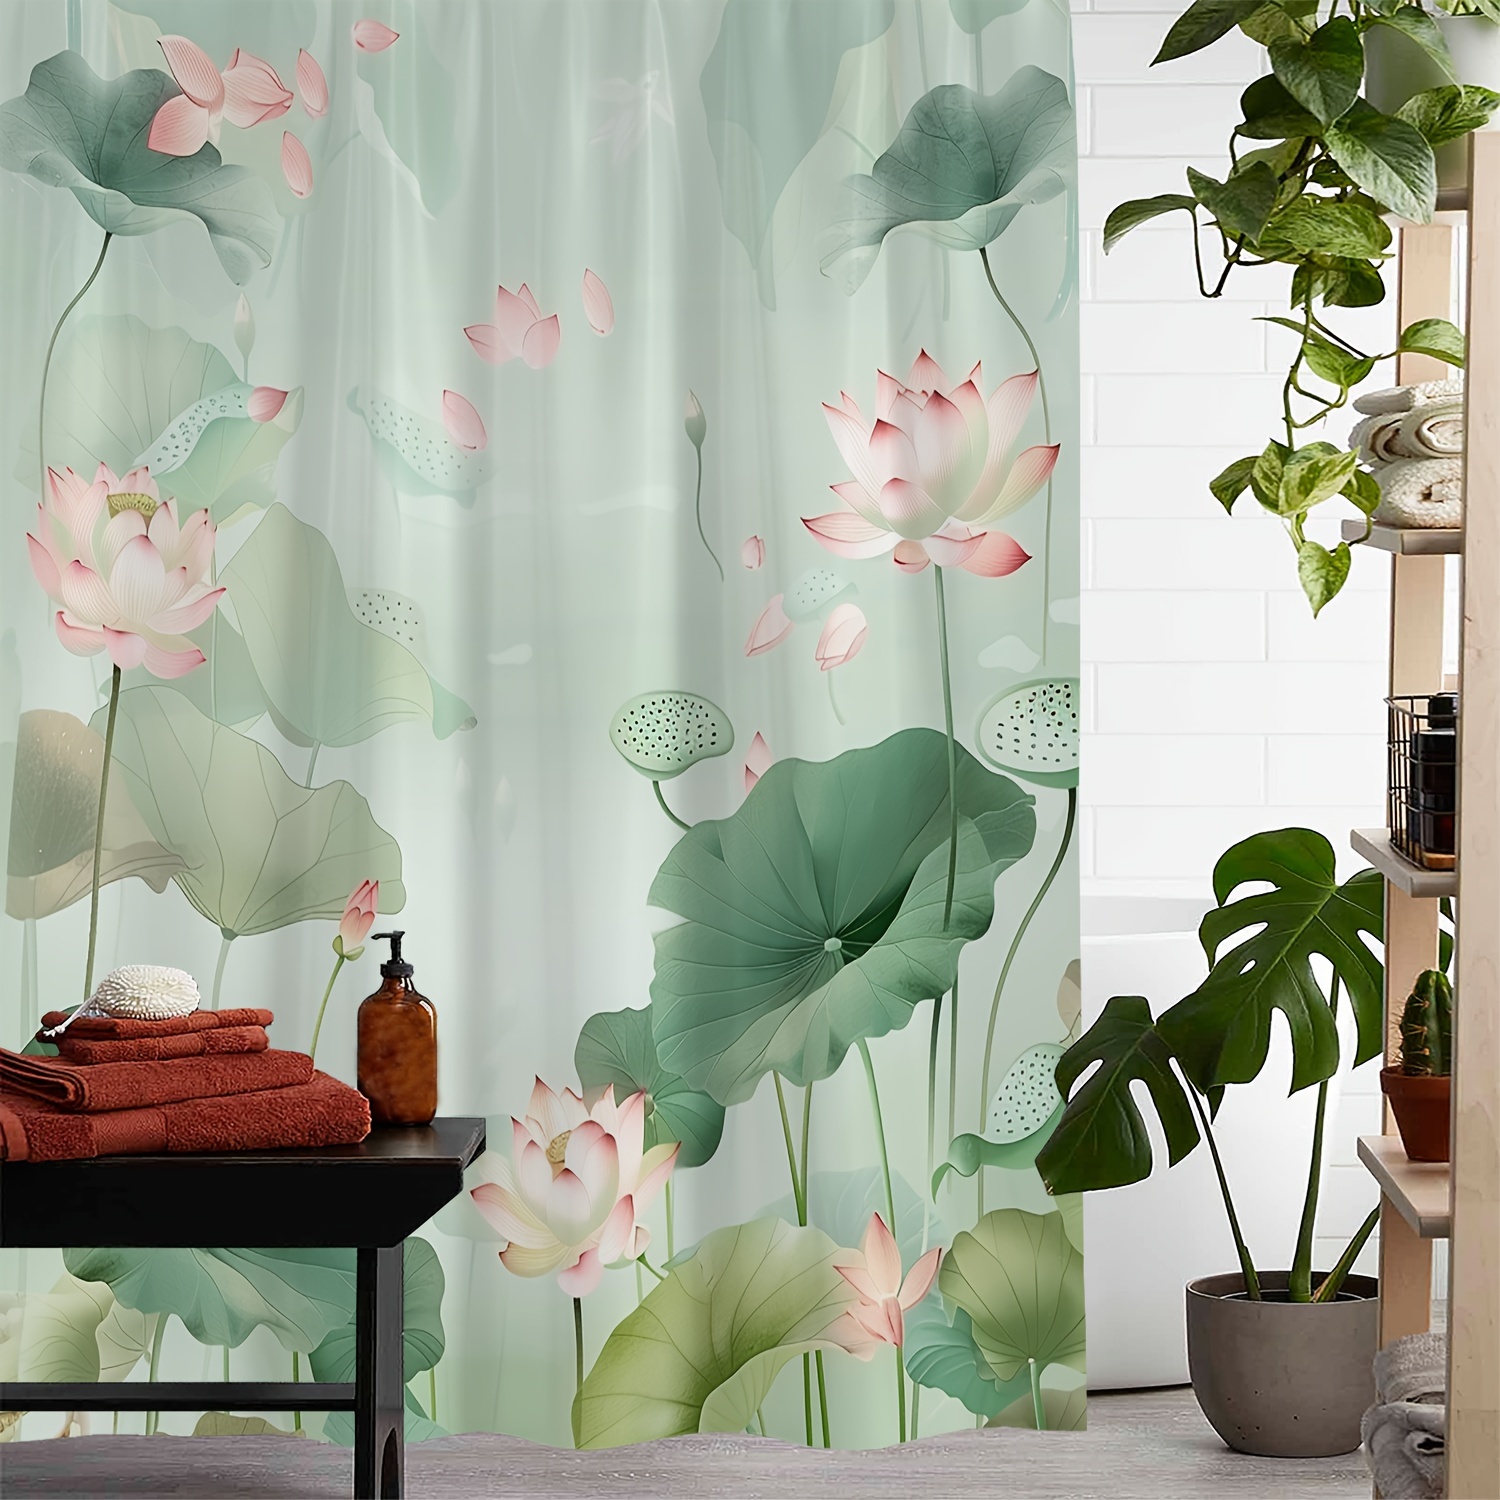 

Water-resistant Polyester Shower Curtain With Lotus Flower Print, Machine Washable, Includes 12 Hooks, Woven Fabric, Artistic Design - Ideal For Bathroom Decor